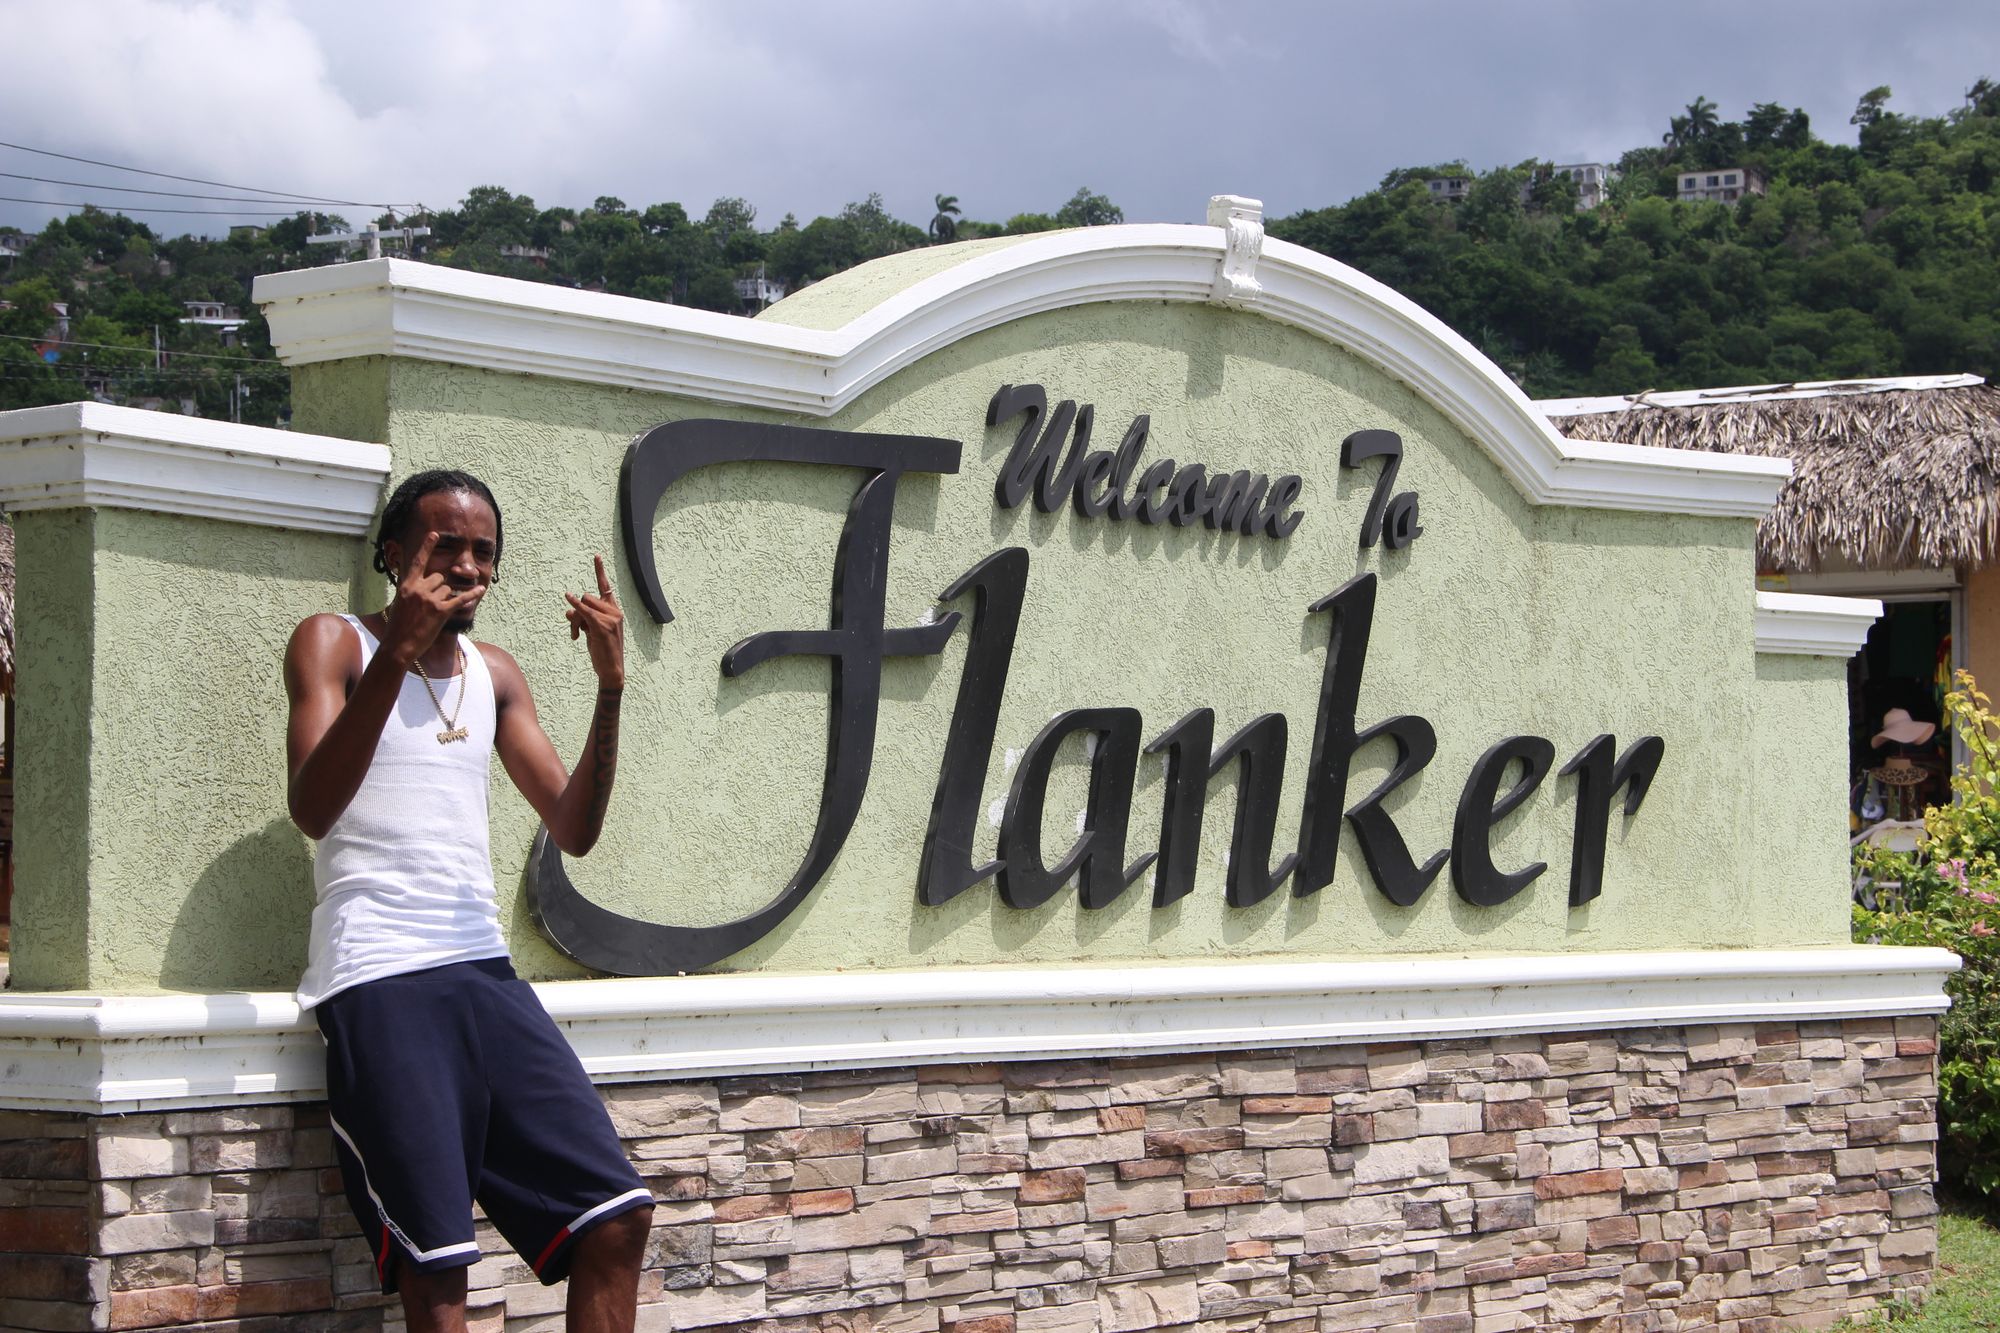 A man leans against a large sign that reads "Welcome to Flanker" and squints his eyes in the sun, holding up hand signs.